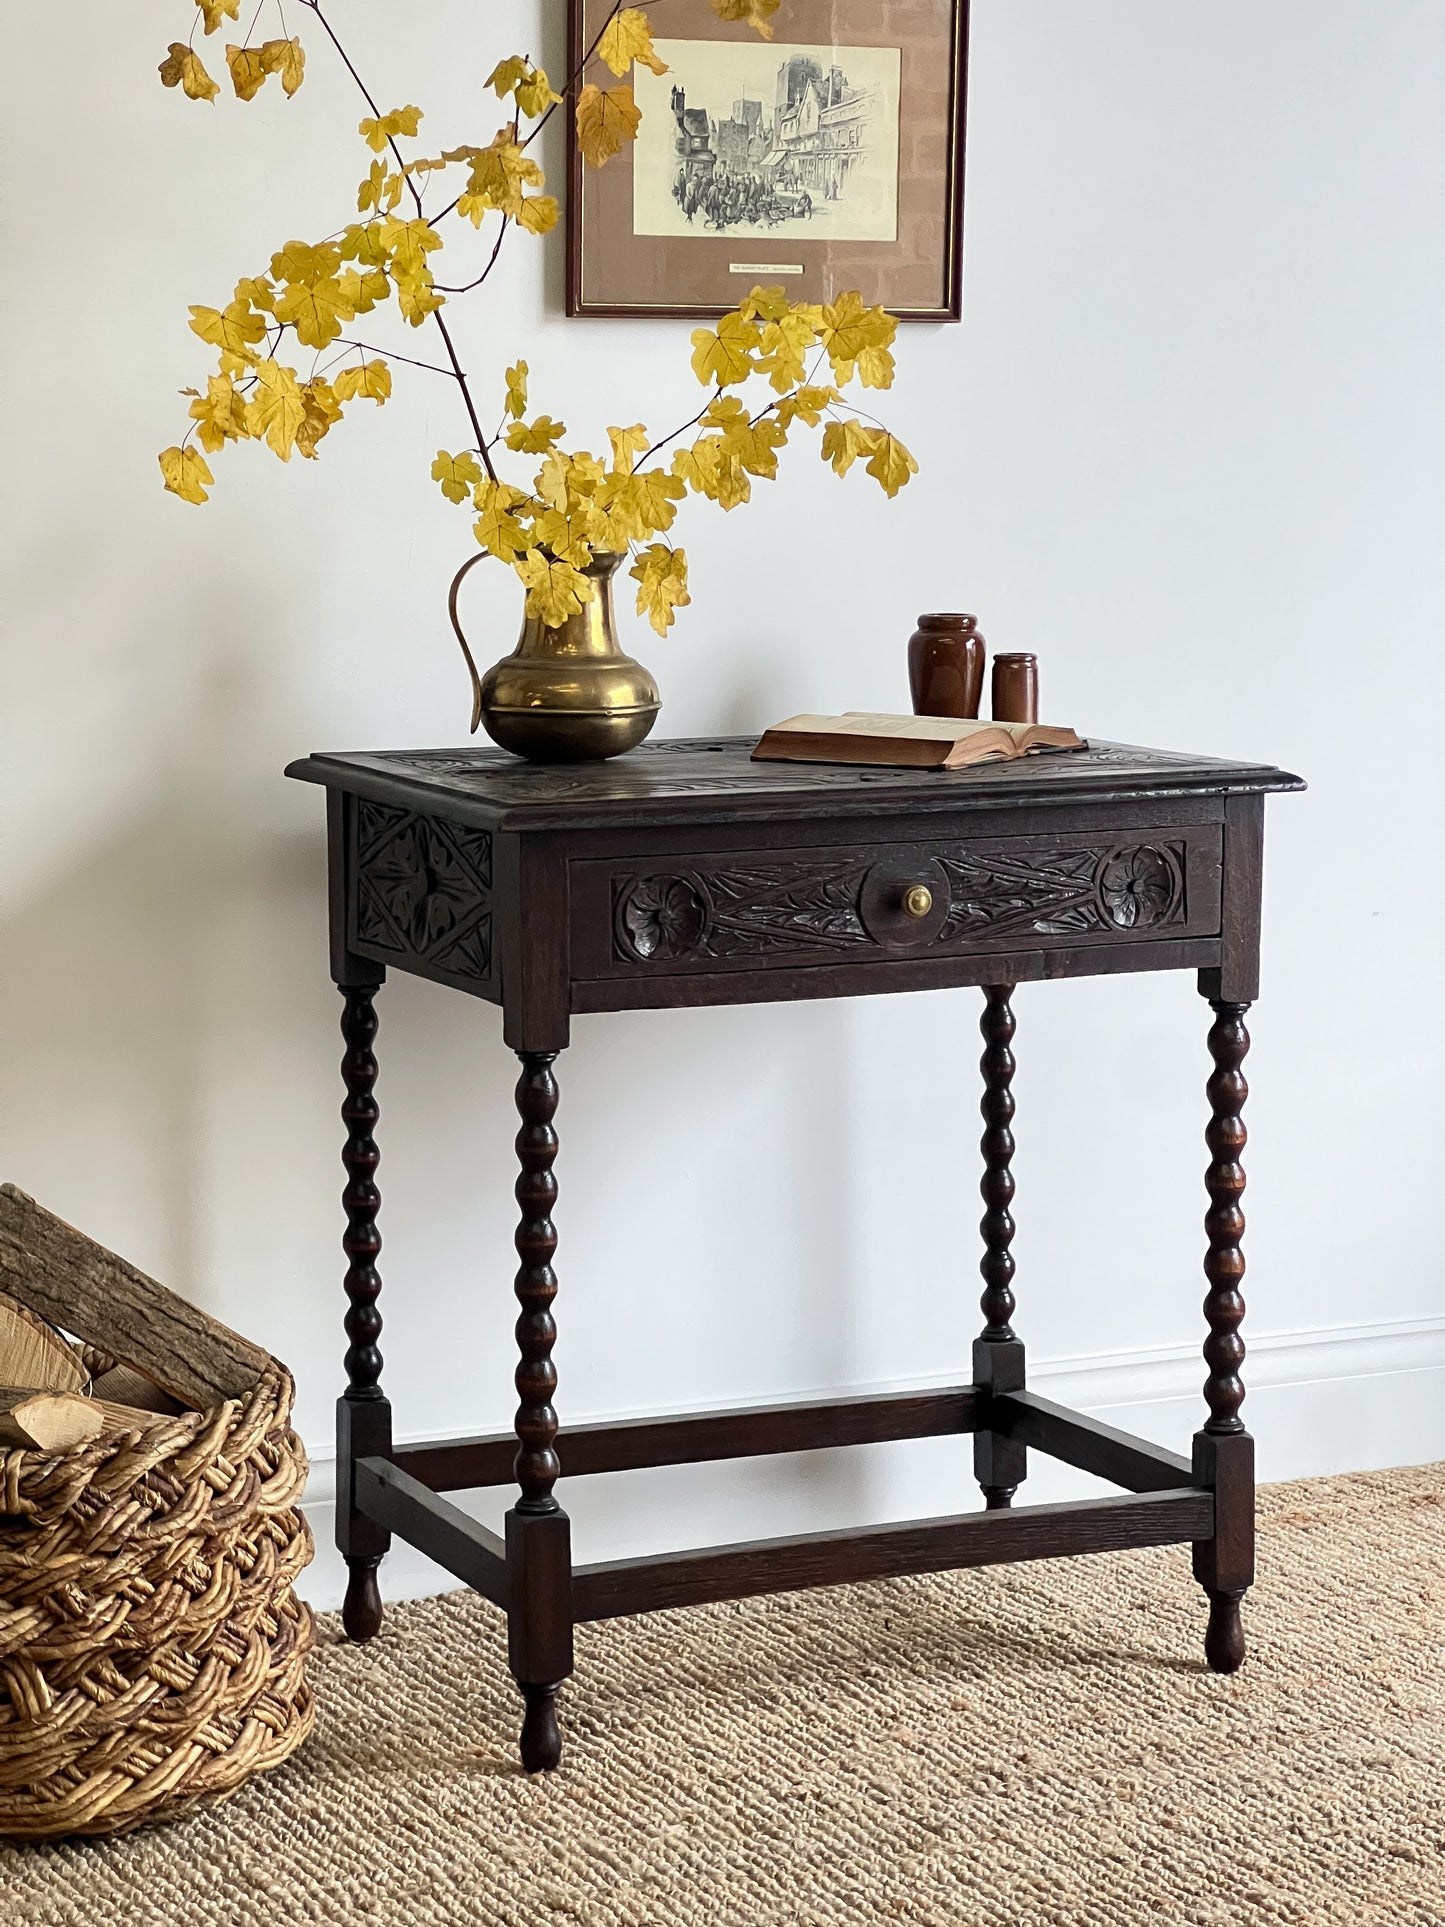 Antique Solid Oak Table with Bobbin Legs & Hand Carved Details